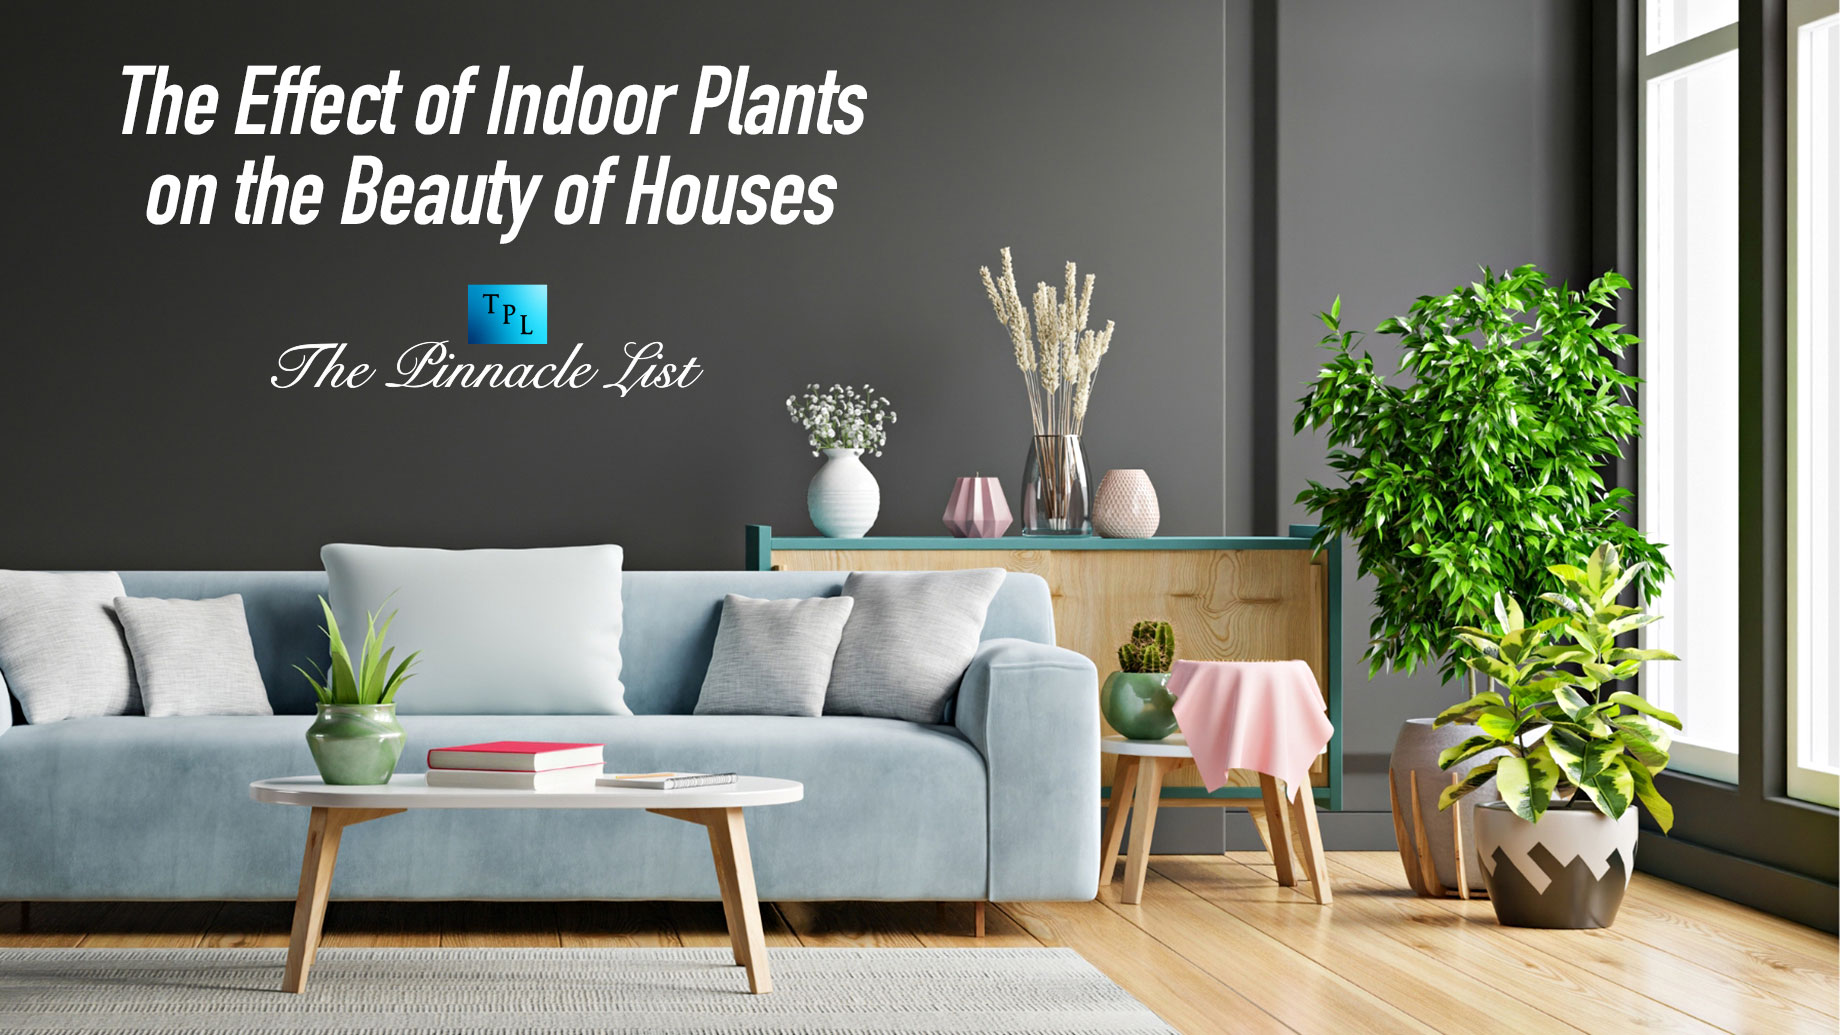 The Effect of Indoor Plants on the Beauty of Houses